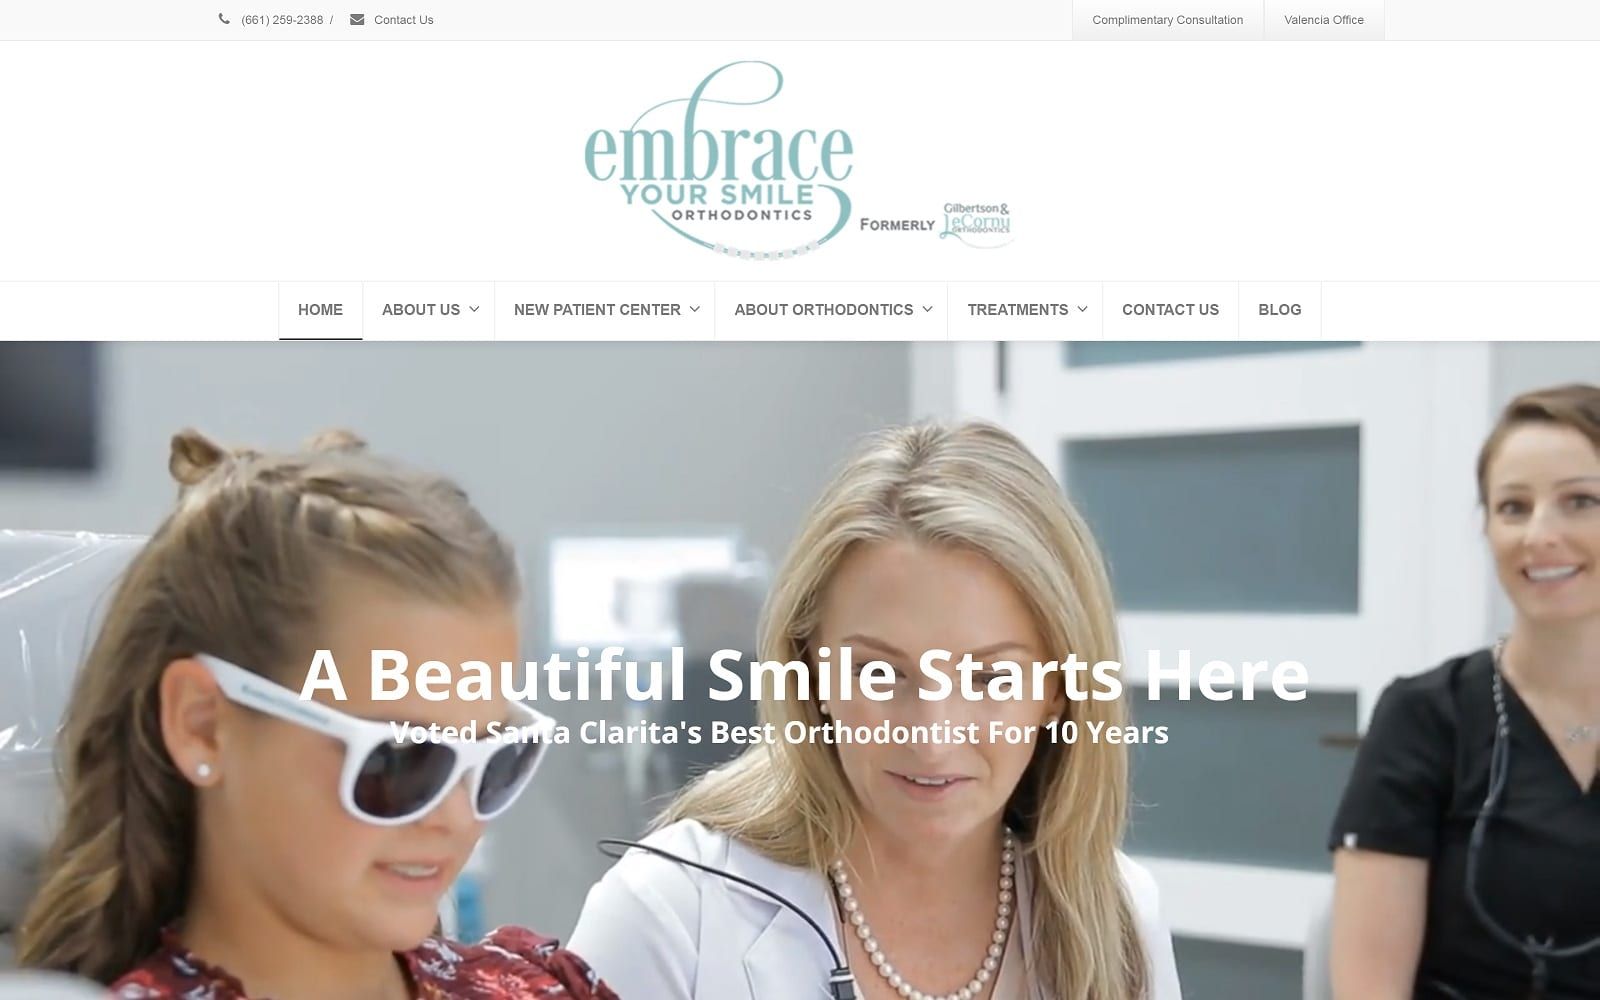 The screenshot of embrace your smile orthodontics embraceyoursmile. Com website